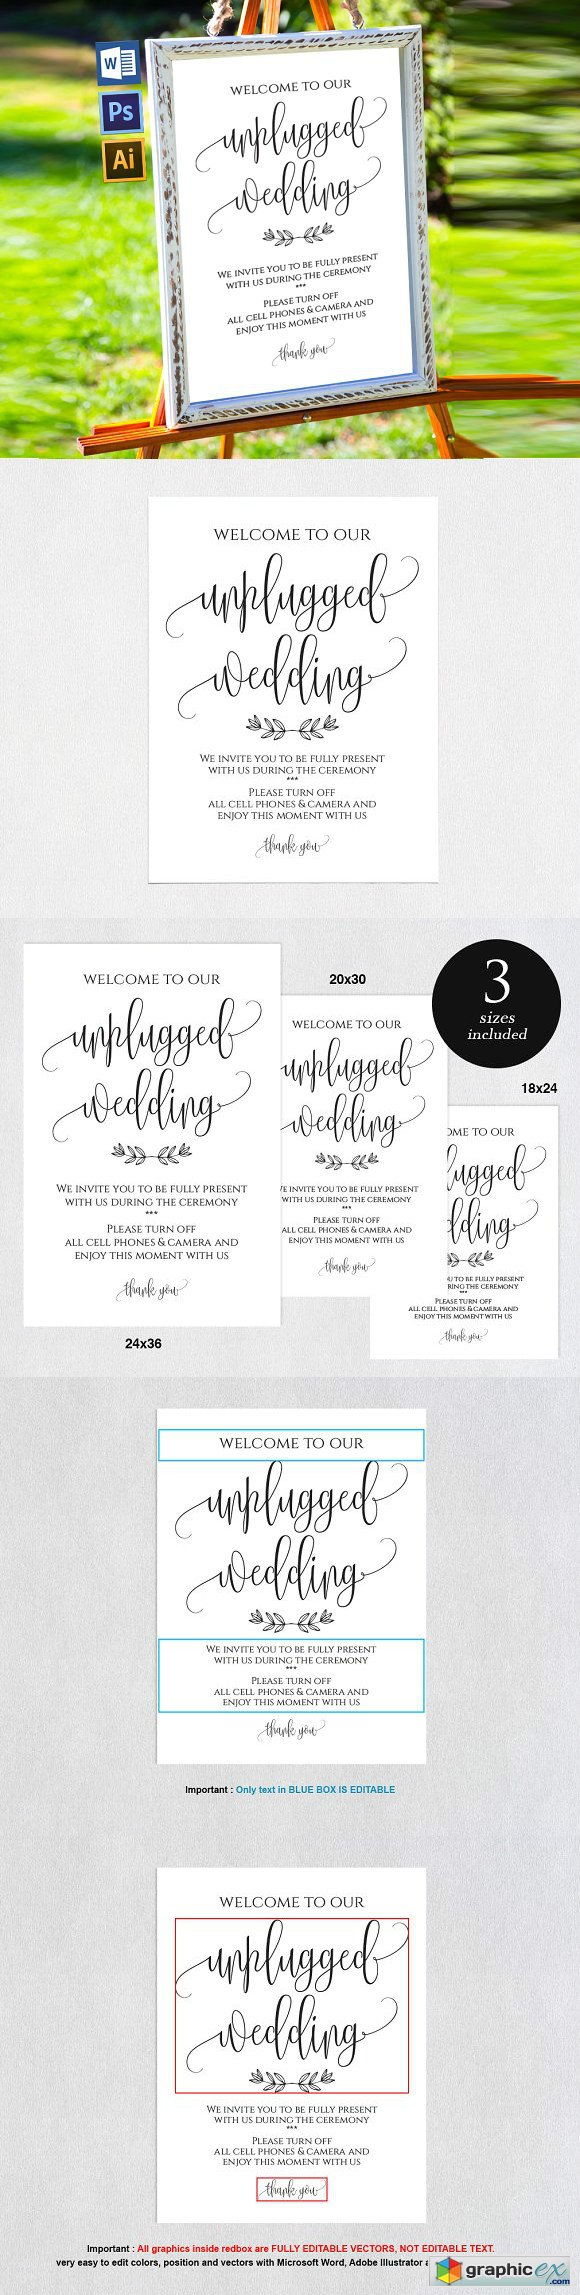 Unplugged wedding sign Wpc351